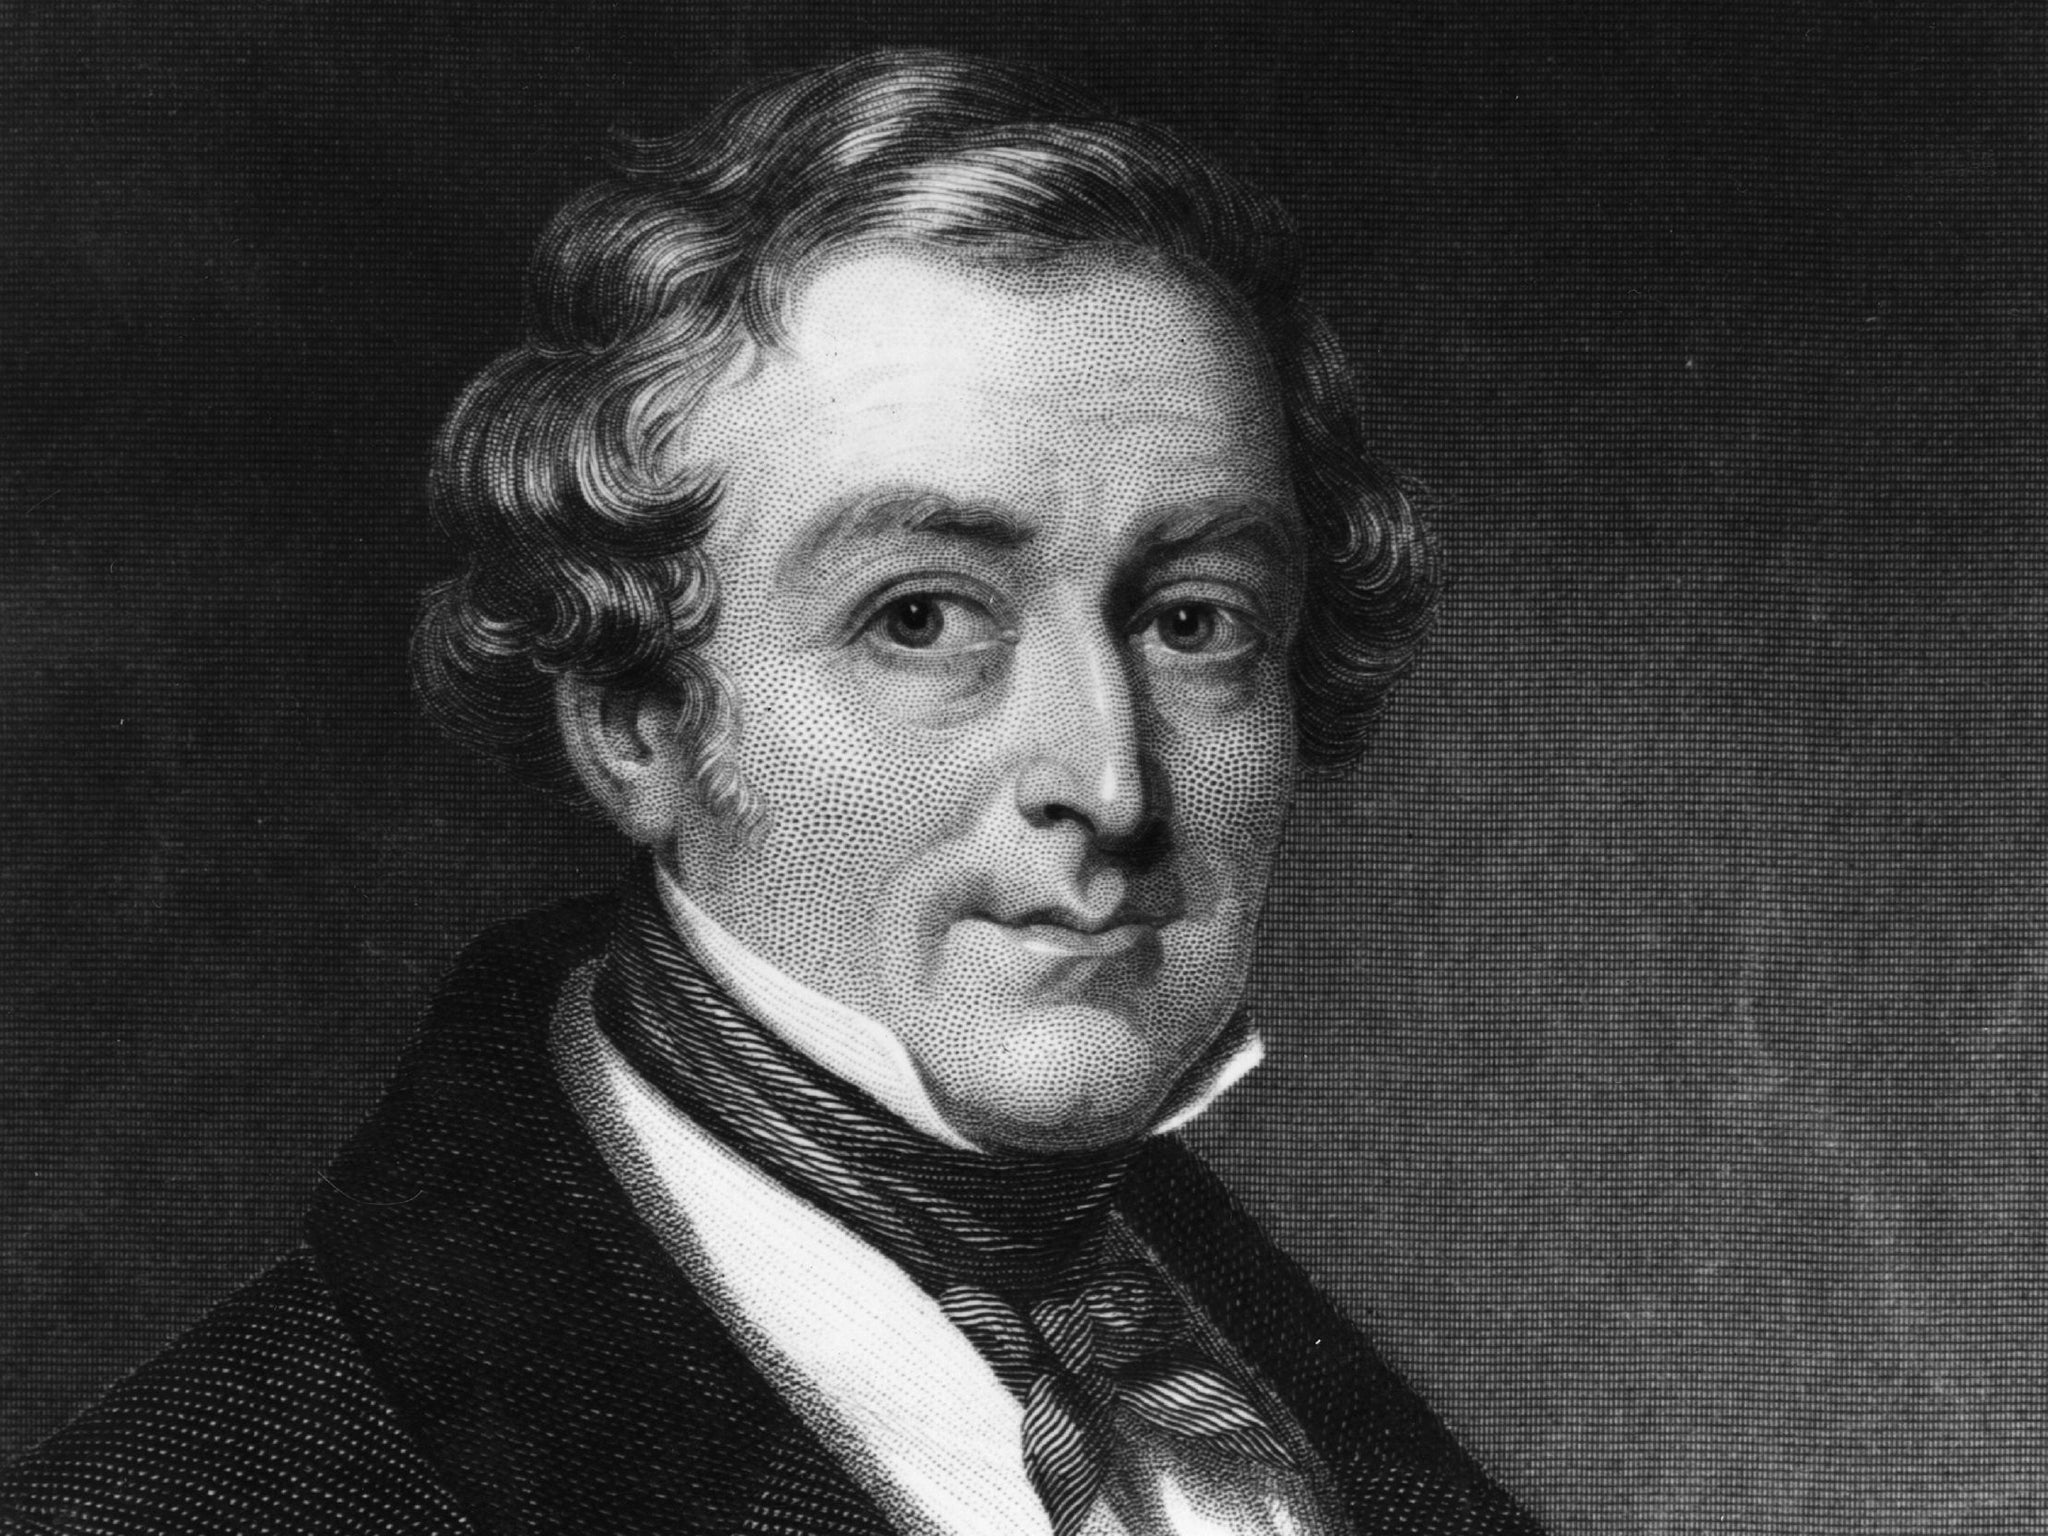 Sir Robert Peel failed to command a majority in the Commons and lost the subsequent election